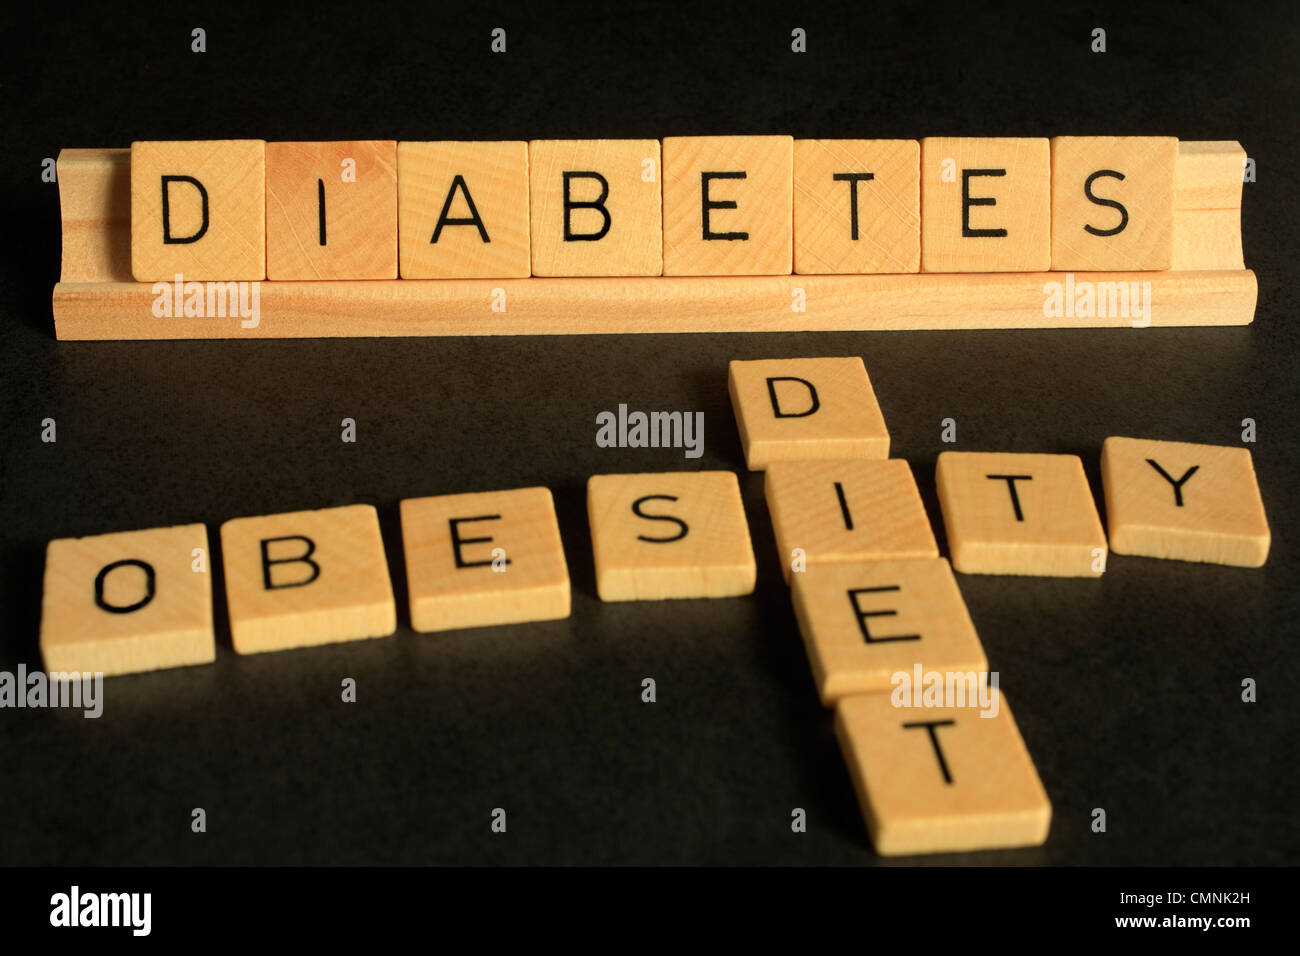 A conceptual look at diabetes, scrabble letters spell out the words diabetes, obesity and diet. Stock Photo